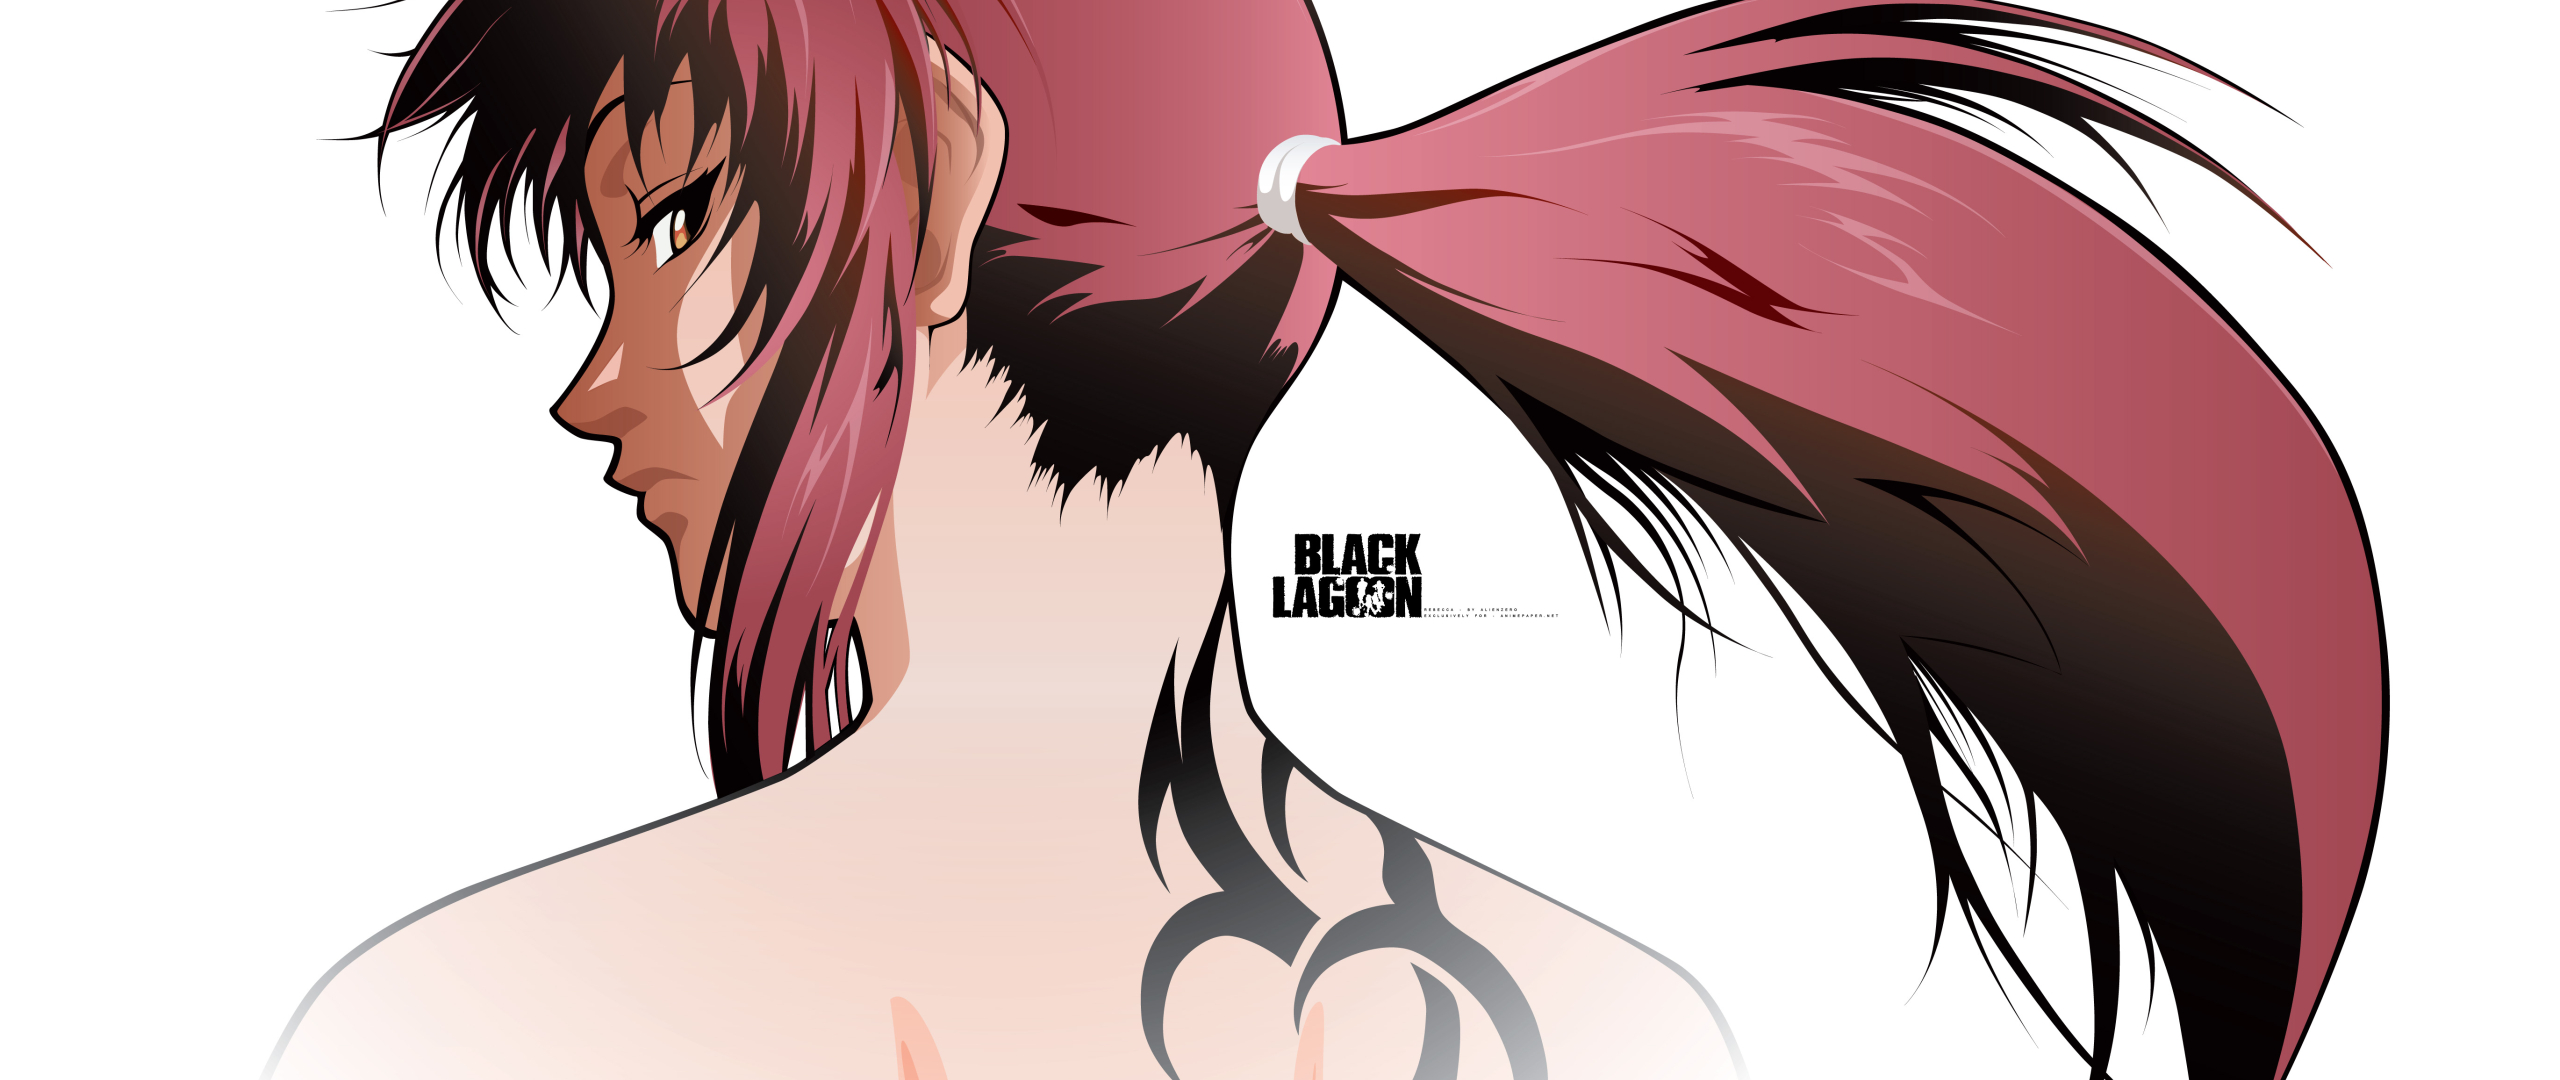 2560x1080 Black Lagoon Revie Rebecca 2560x1080 Resolution Wallpaper Hd Anime 4k Wallpapers Images Photos And Background Wallpapers Den